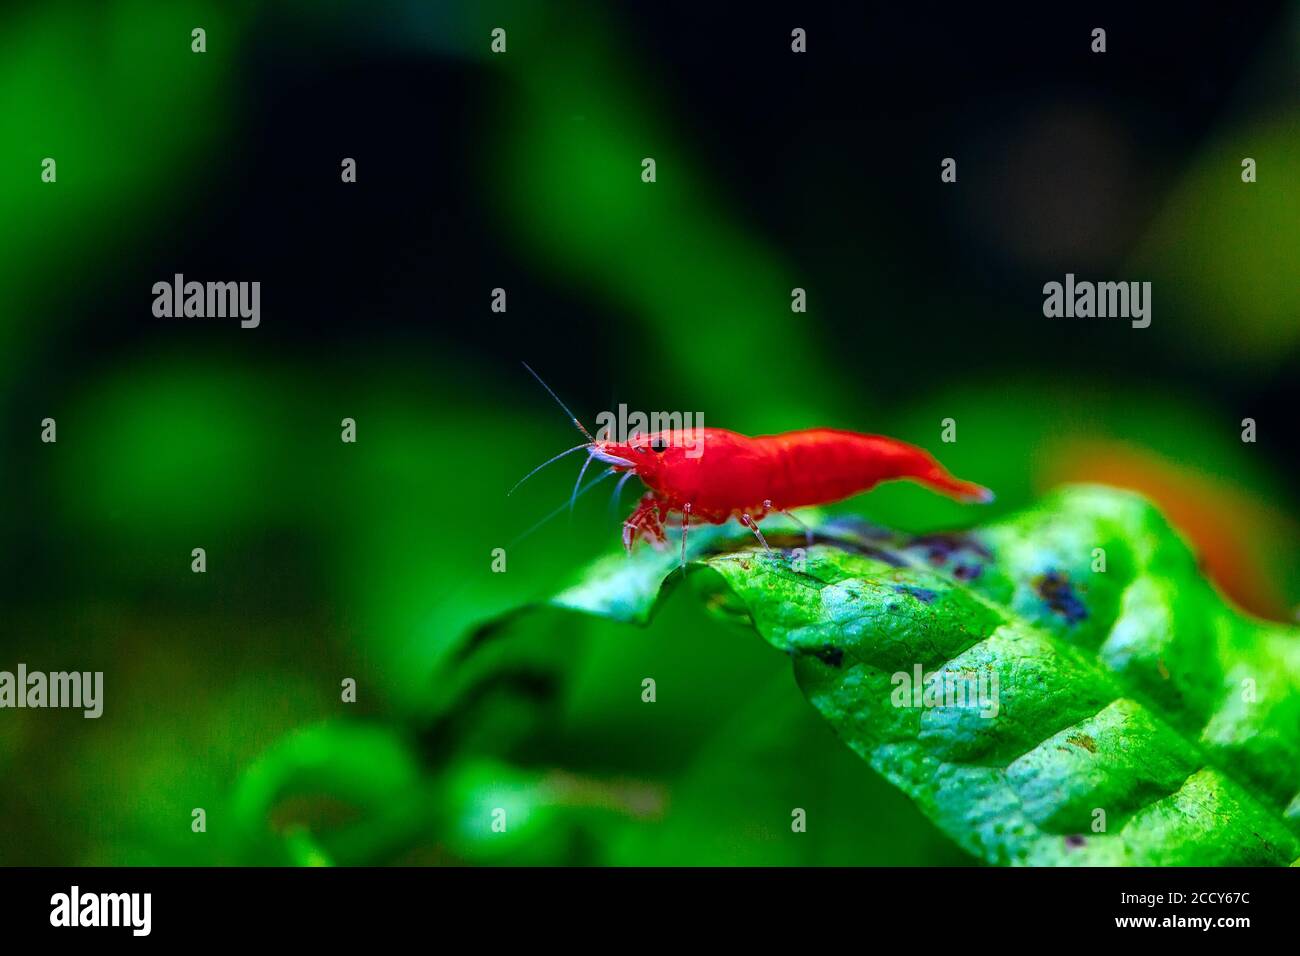 Big fire red or cherry dwarf shrimp with green background in fresh water aquarium tank. Stock Photo